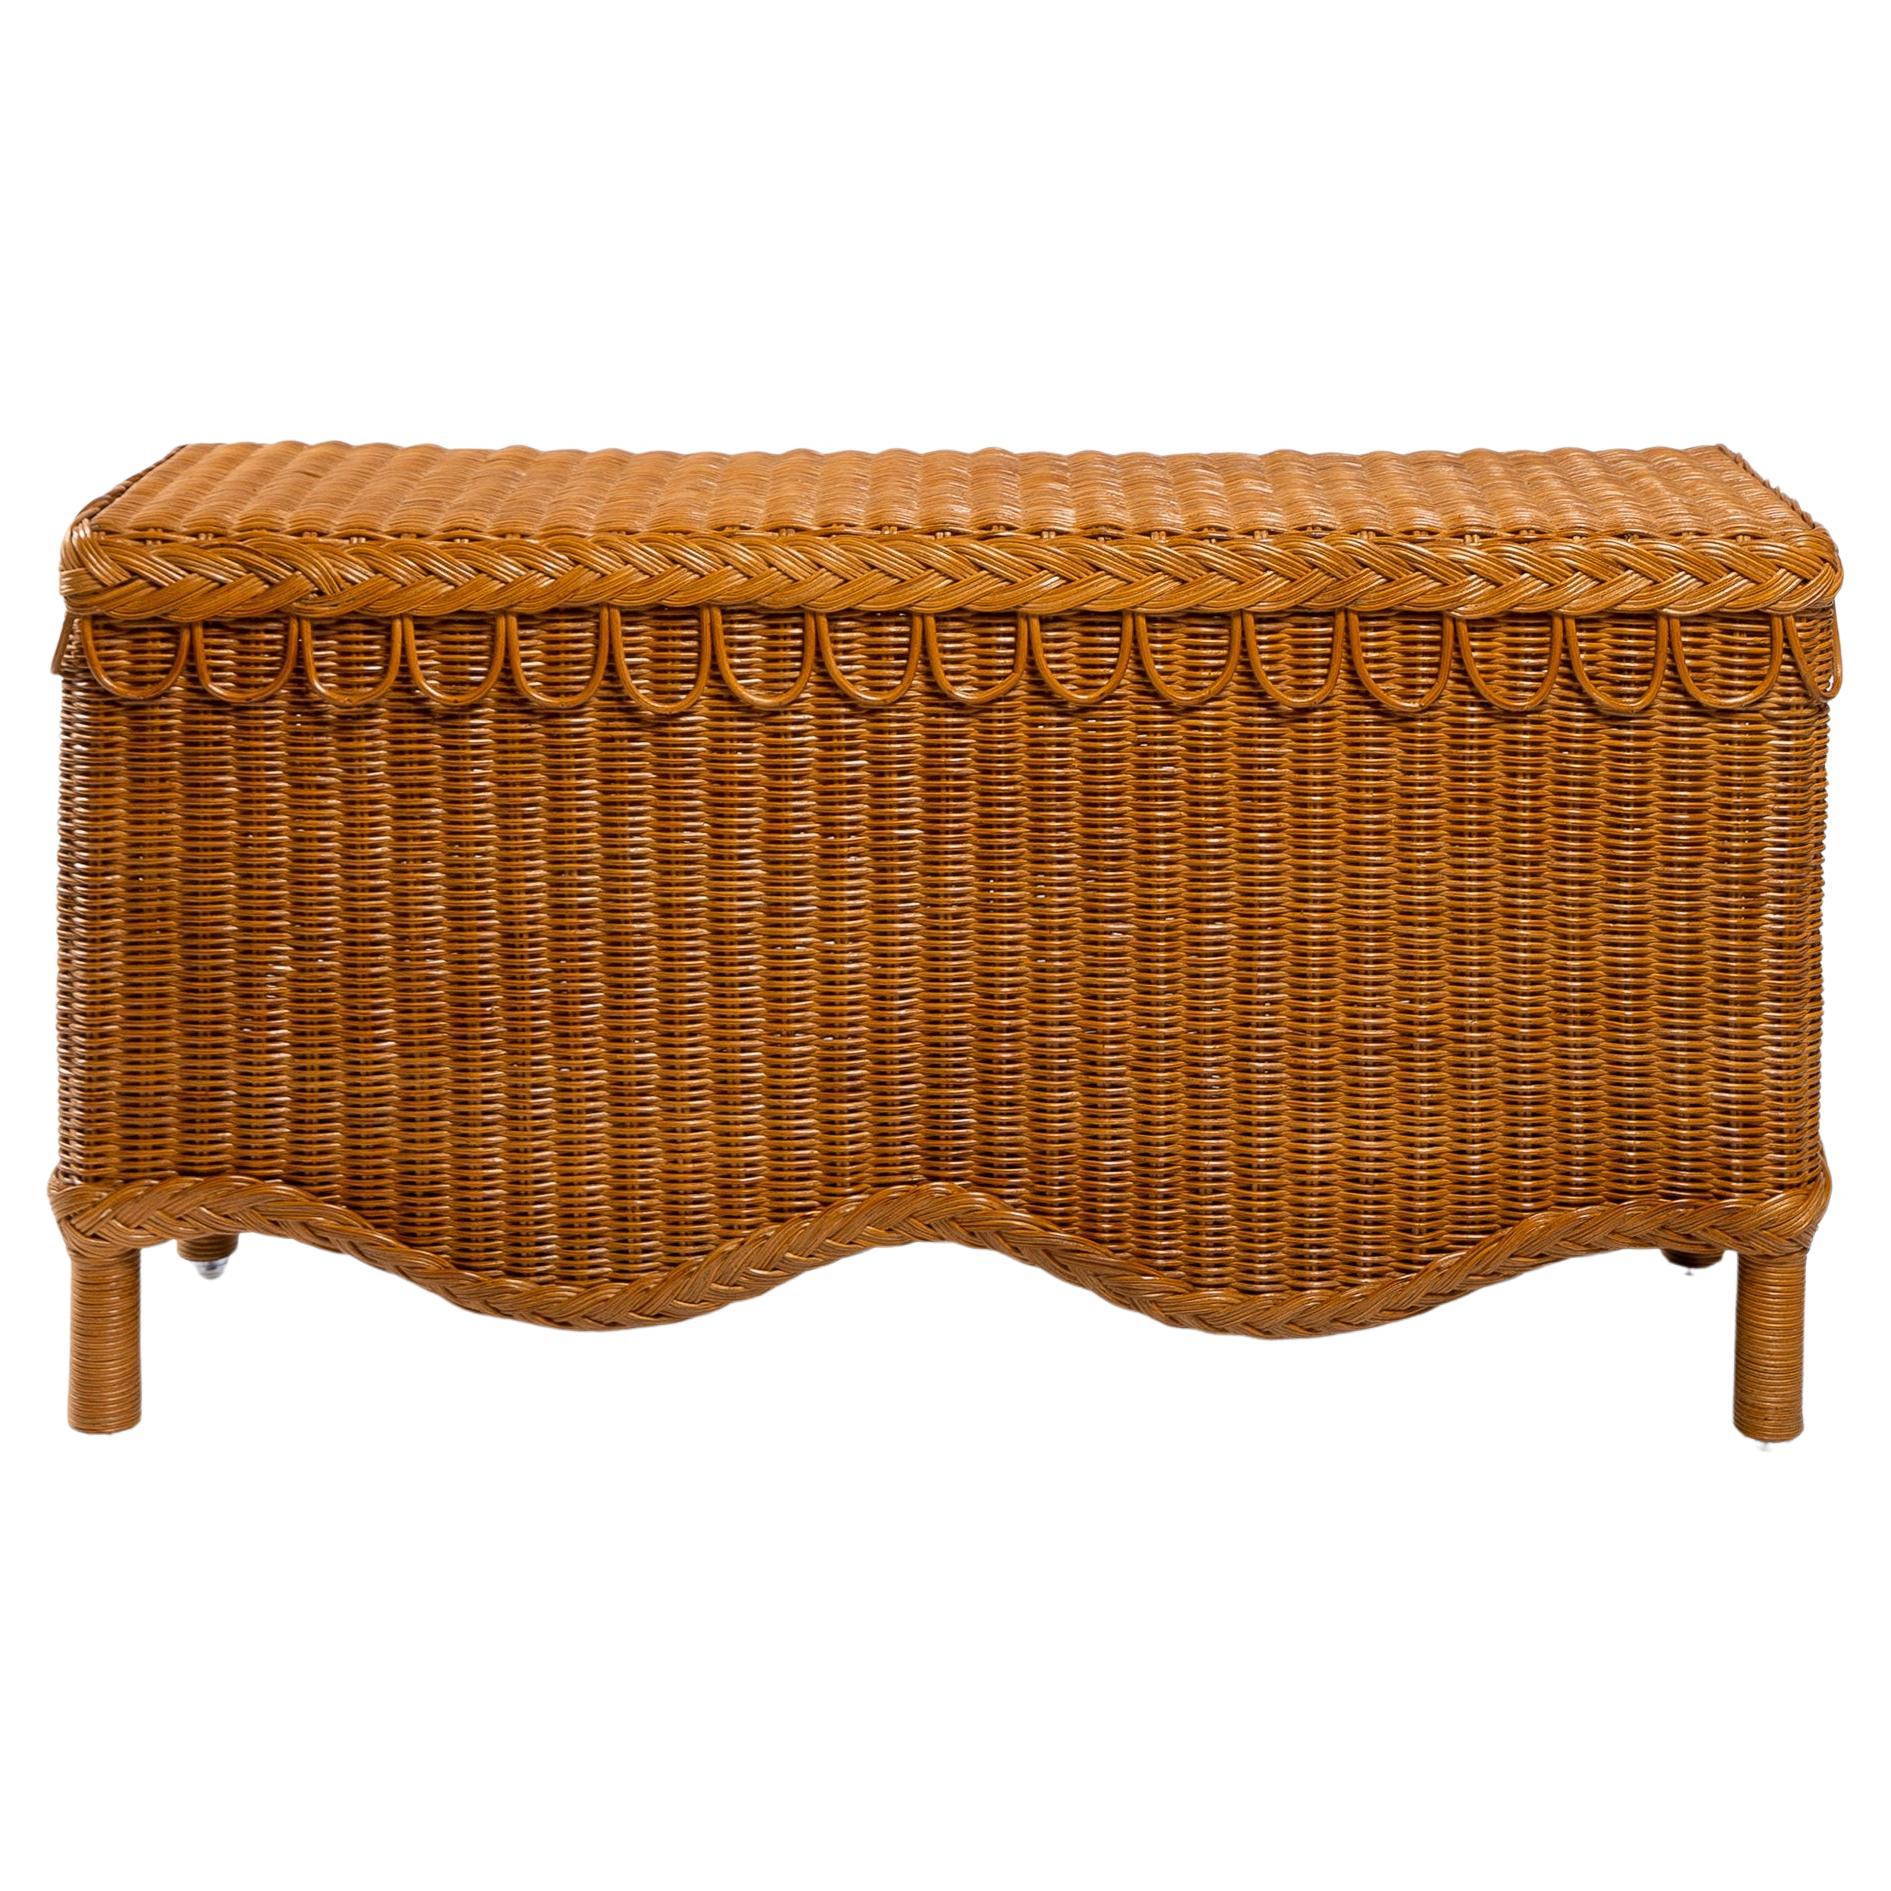 Bunny Bench in Natural Honey Rattan, Modern furniture by Louise Roe For Sale